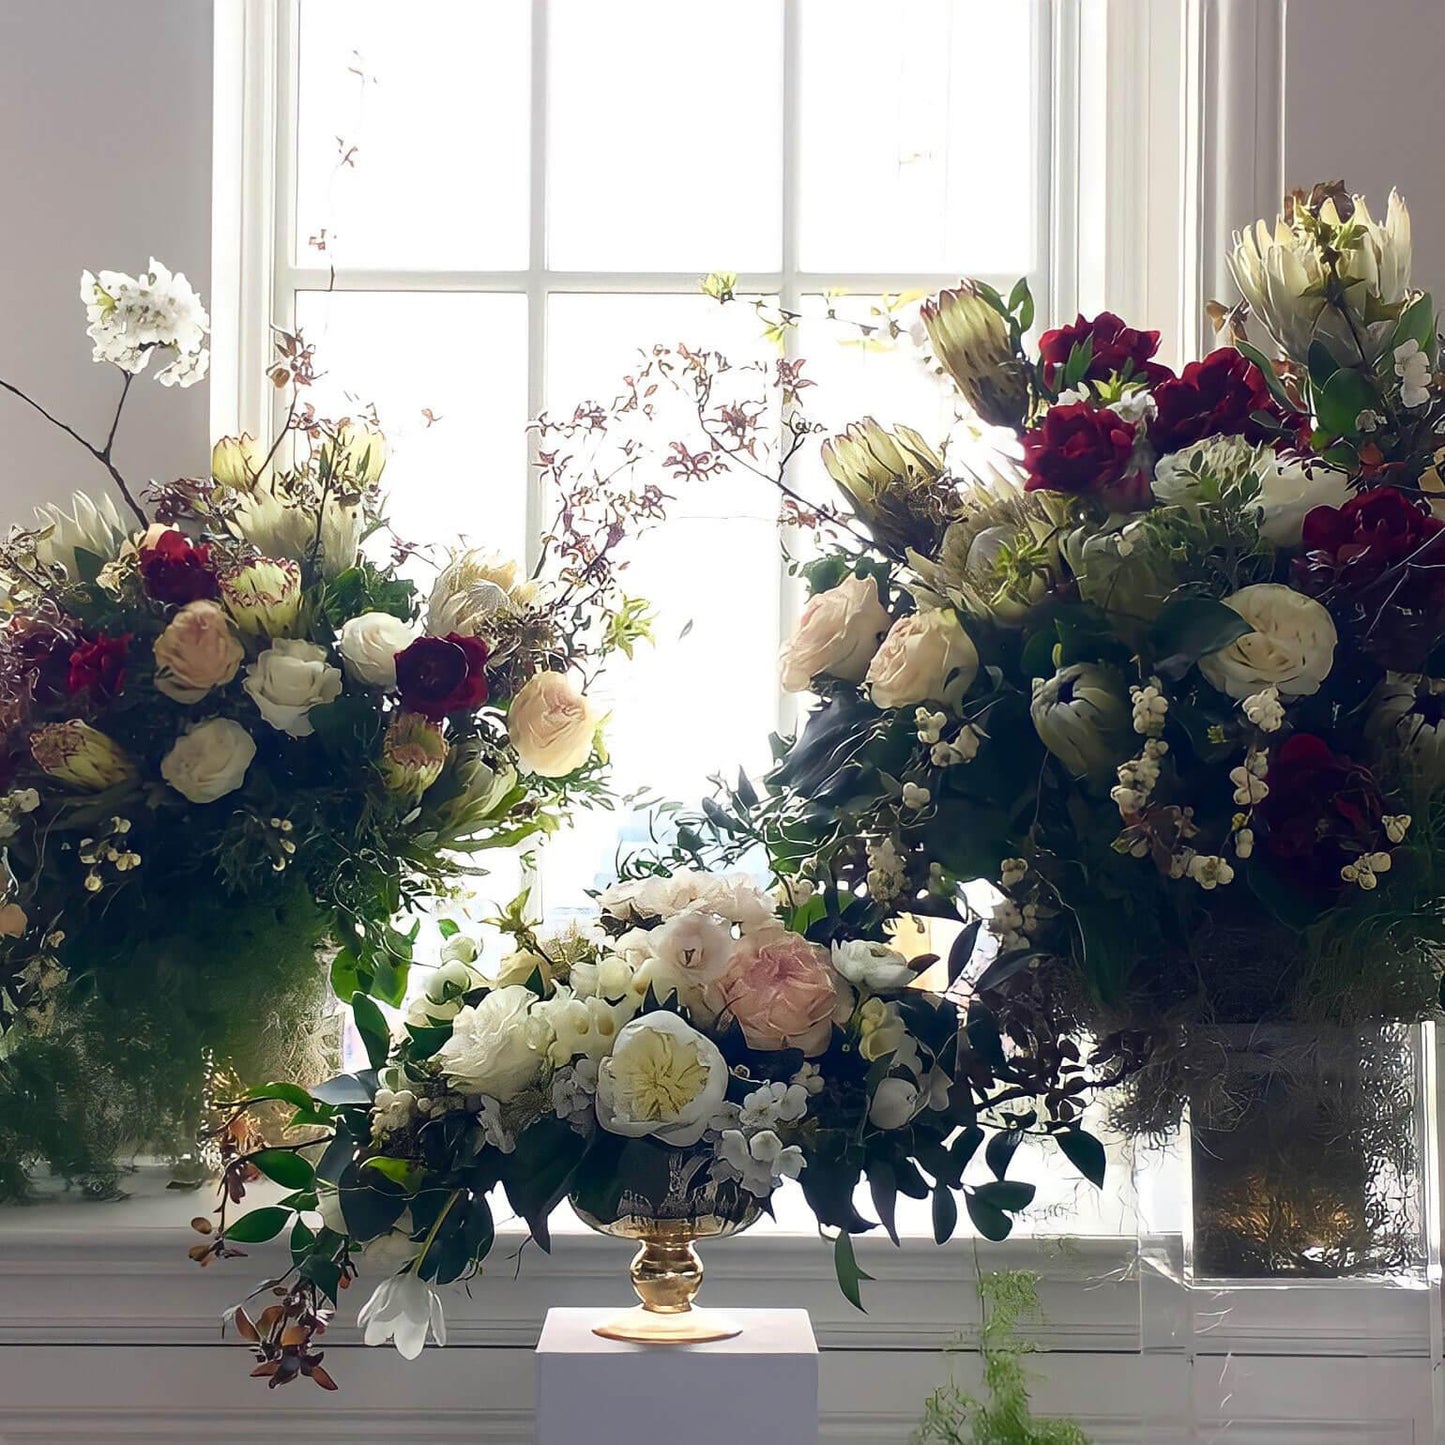 A beautiful arrangement of various flowers in a golden vase, placed on a white pedestal against a window, creating a serene and elegant atmosphere.  Order online for sympathy & event flowers from the best florist in Toronto near you.